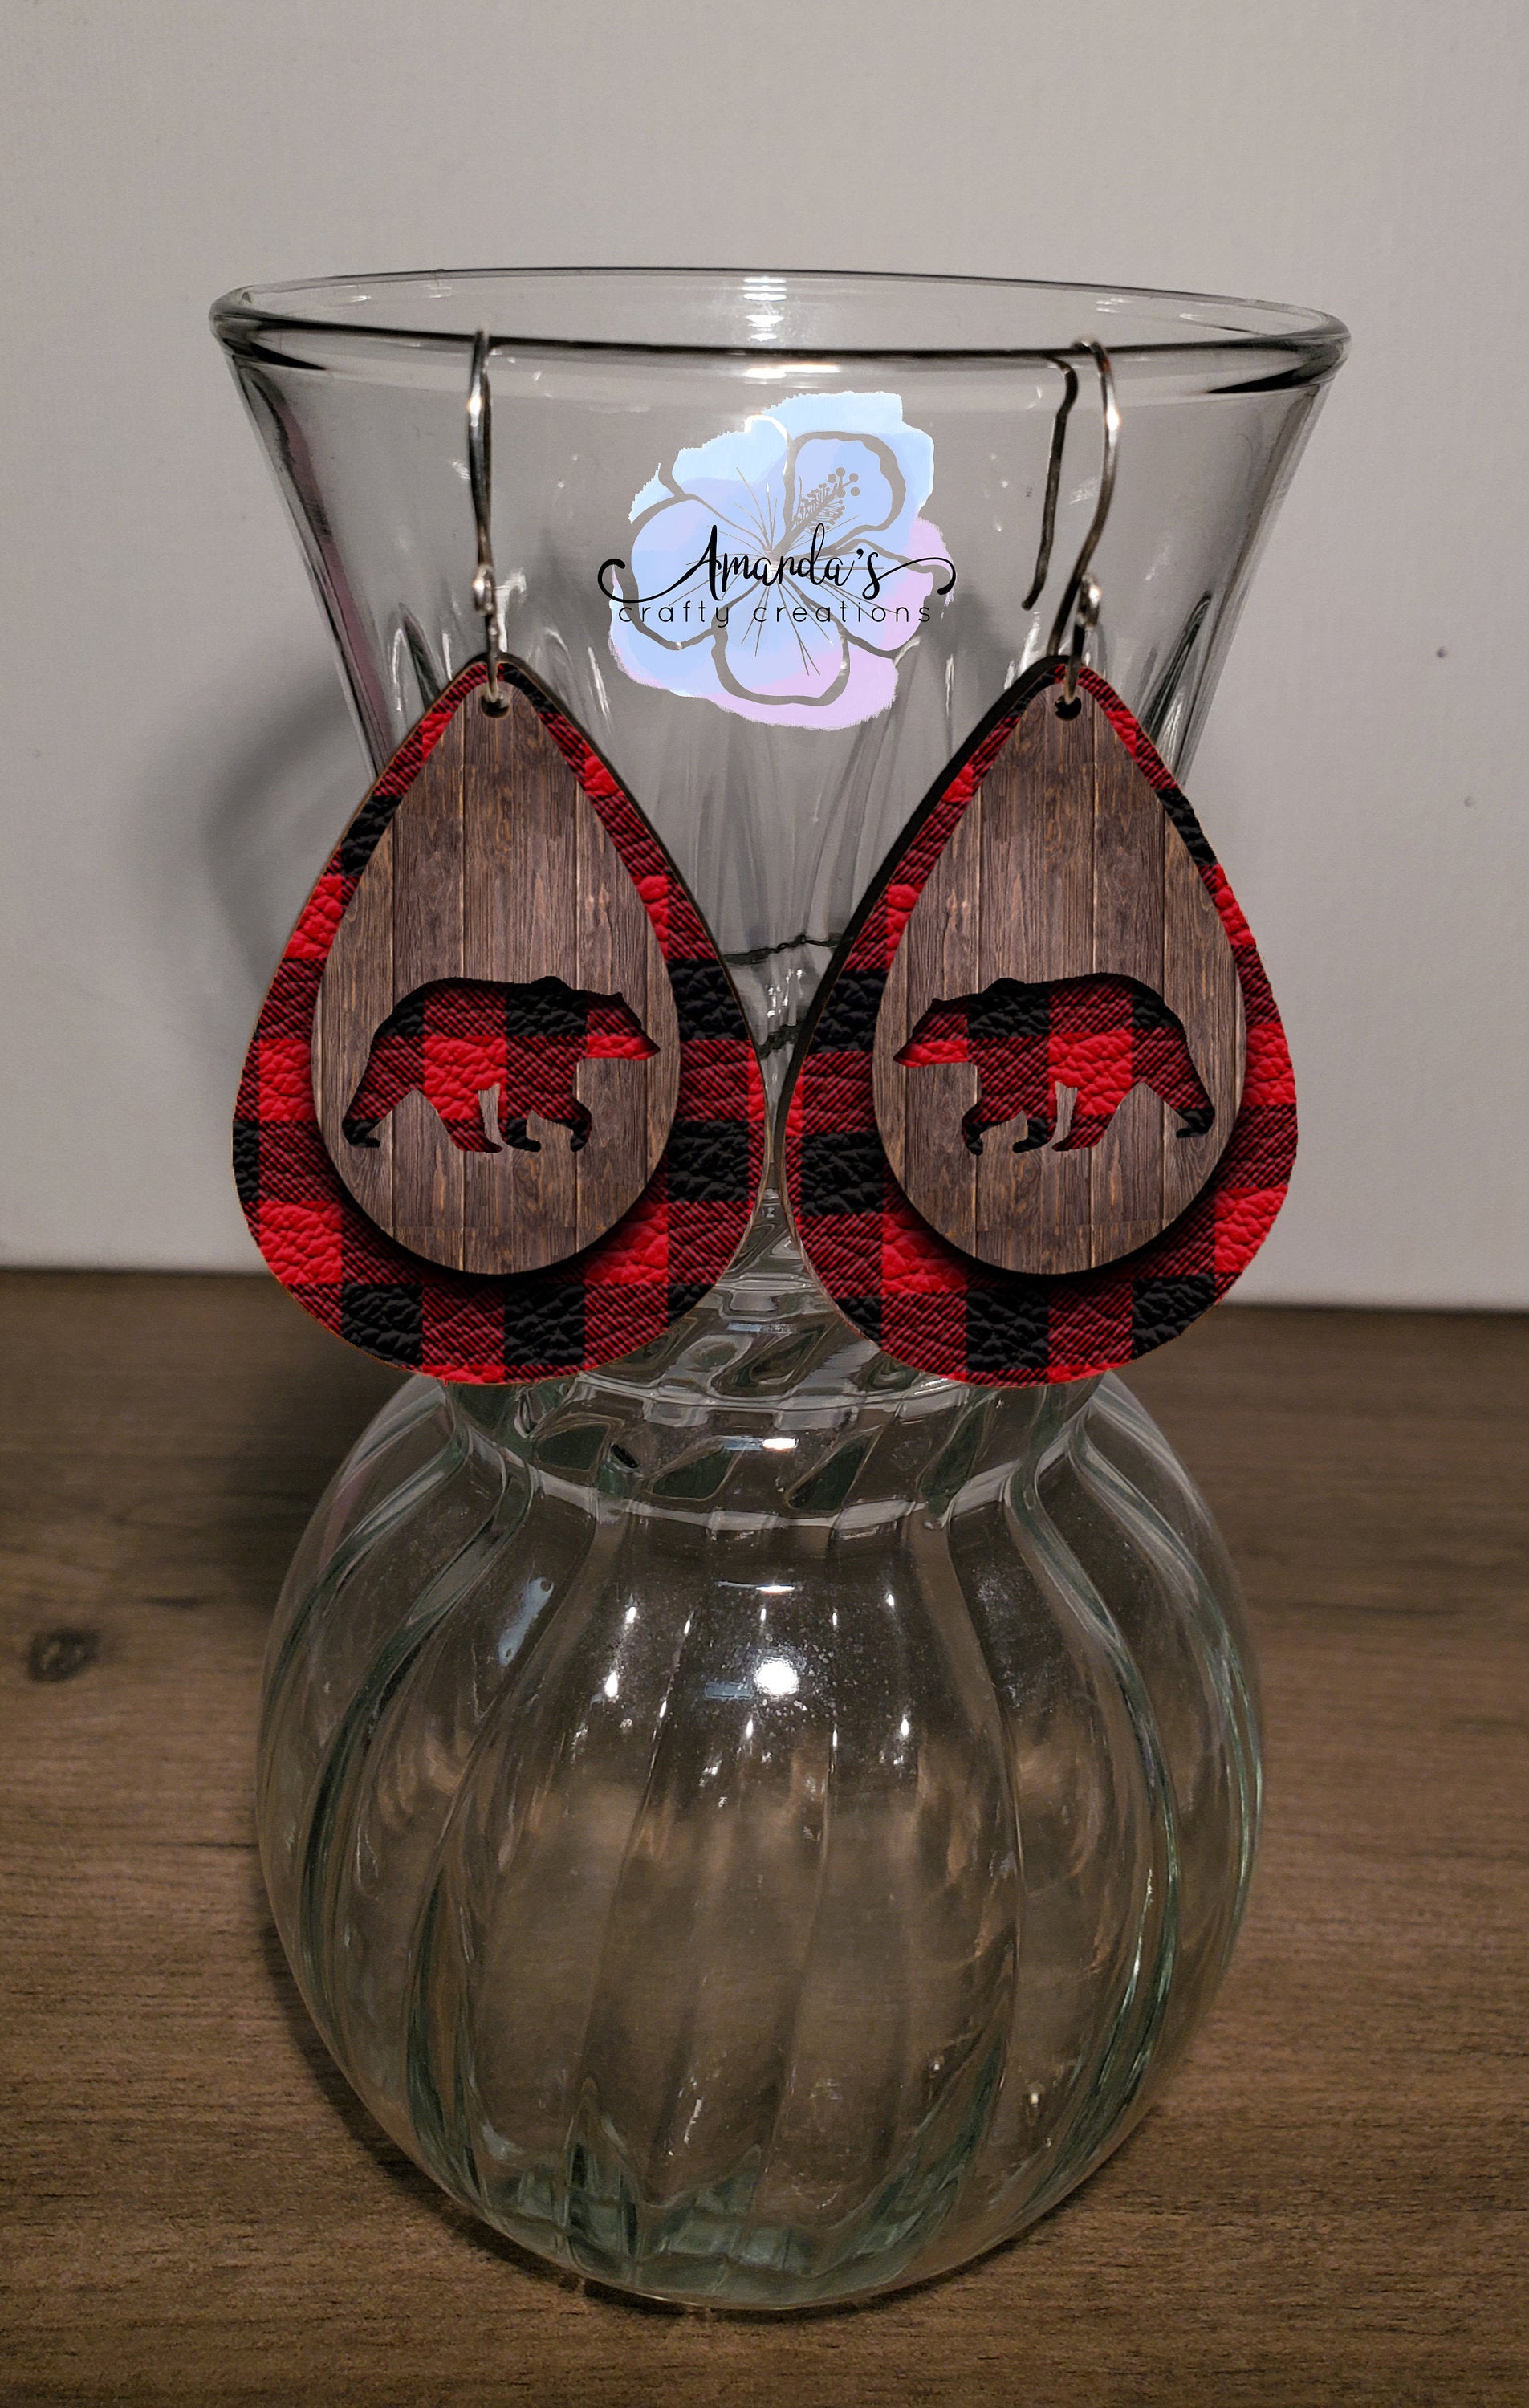 Drop Earrings, red and black buffalo plaid with bears